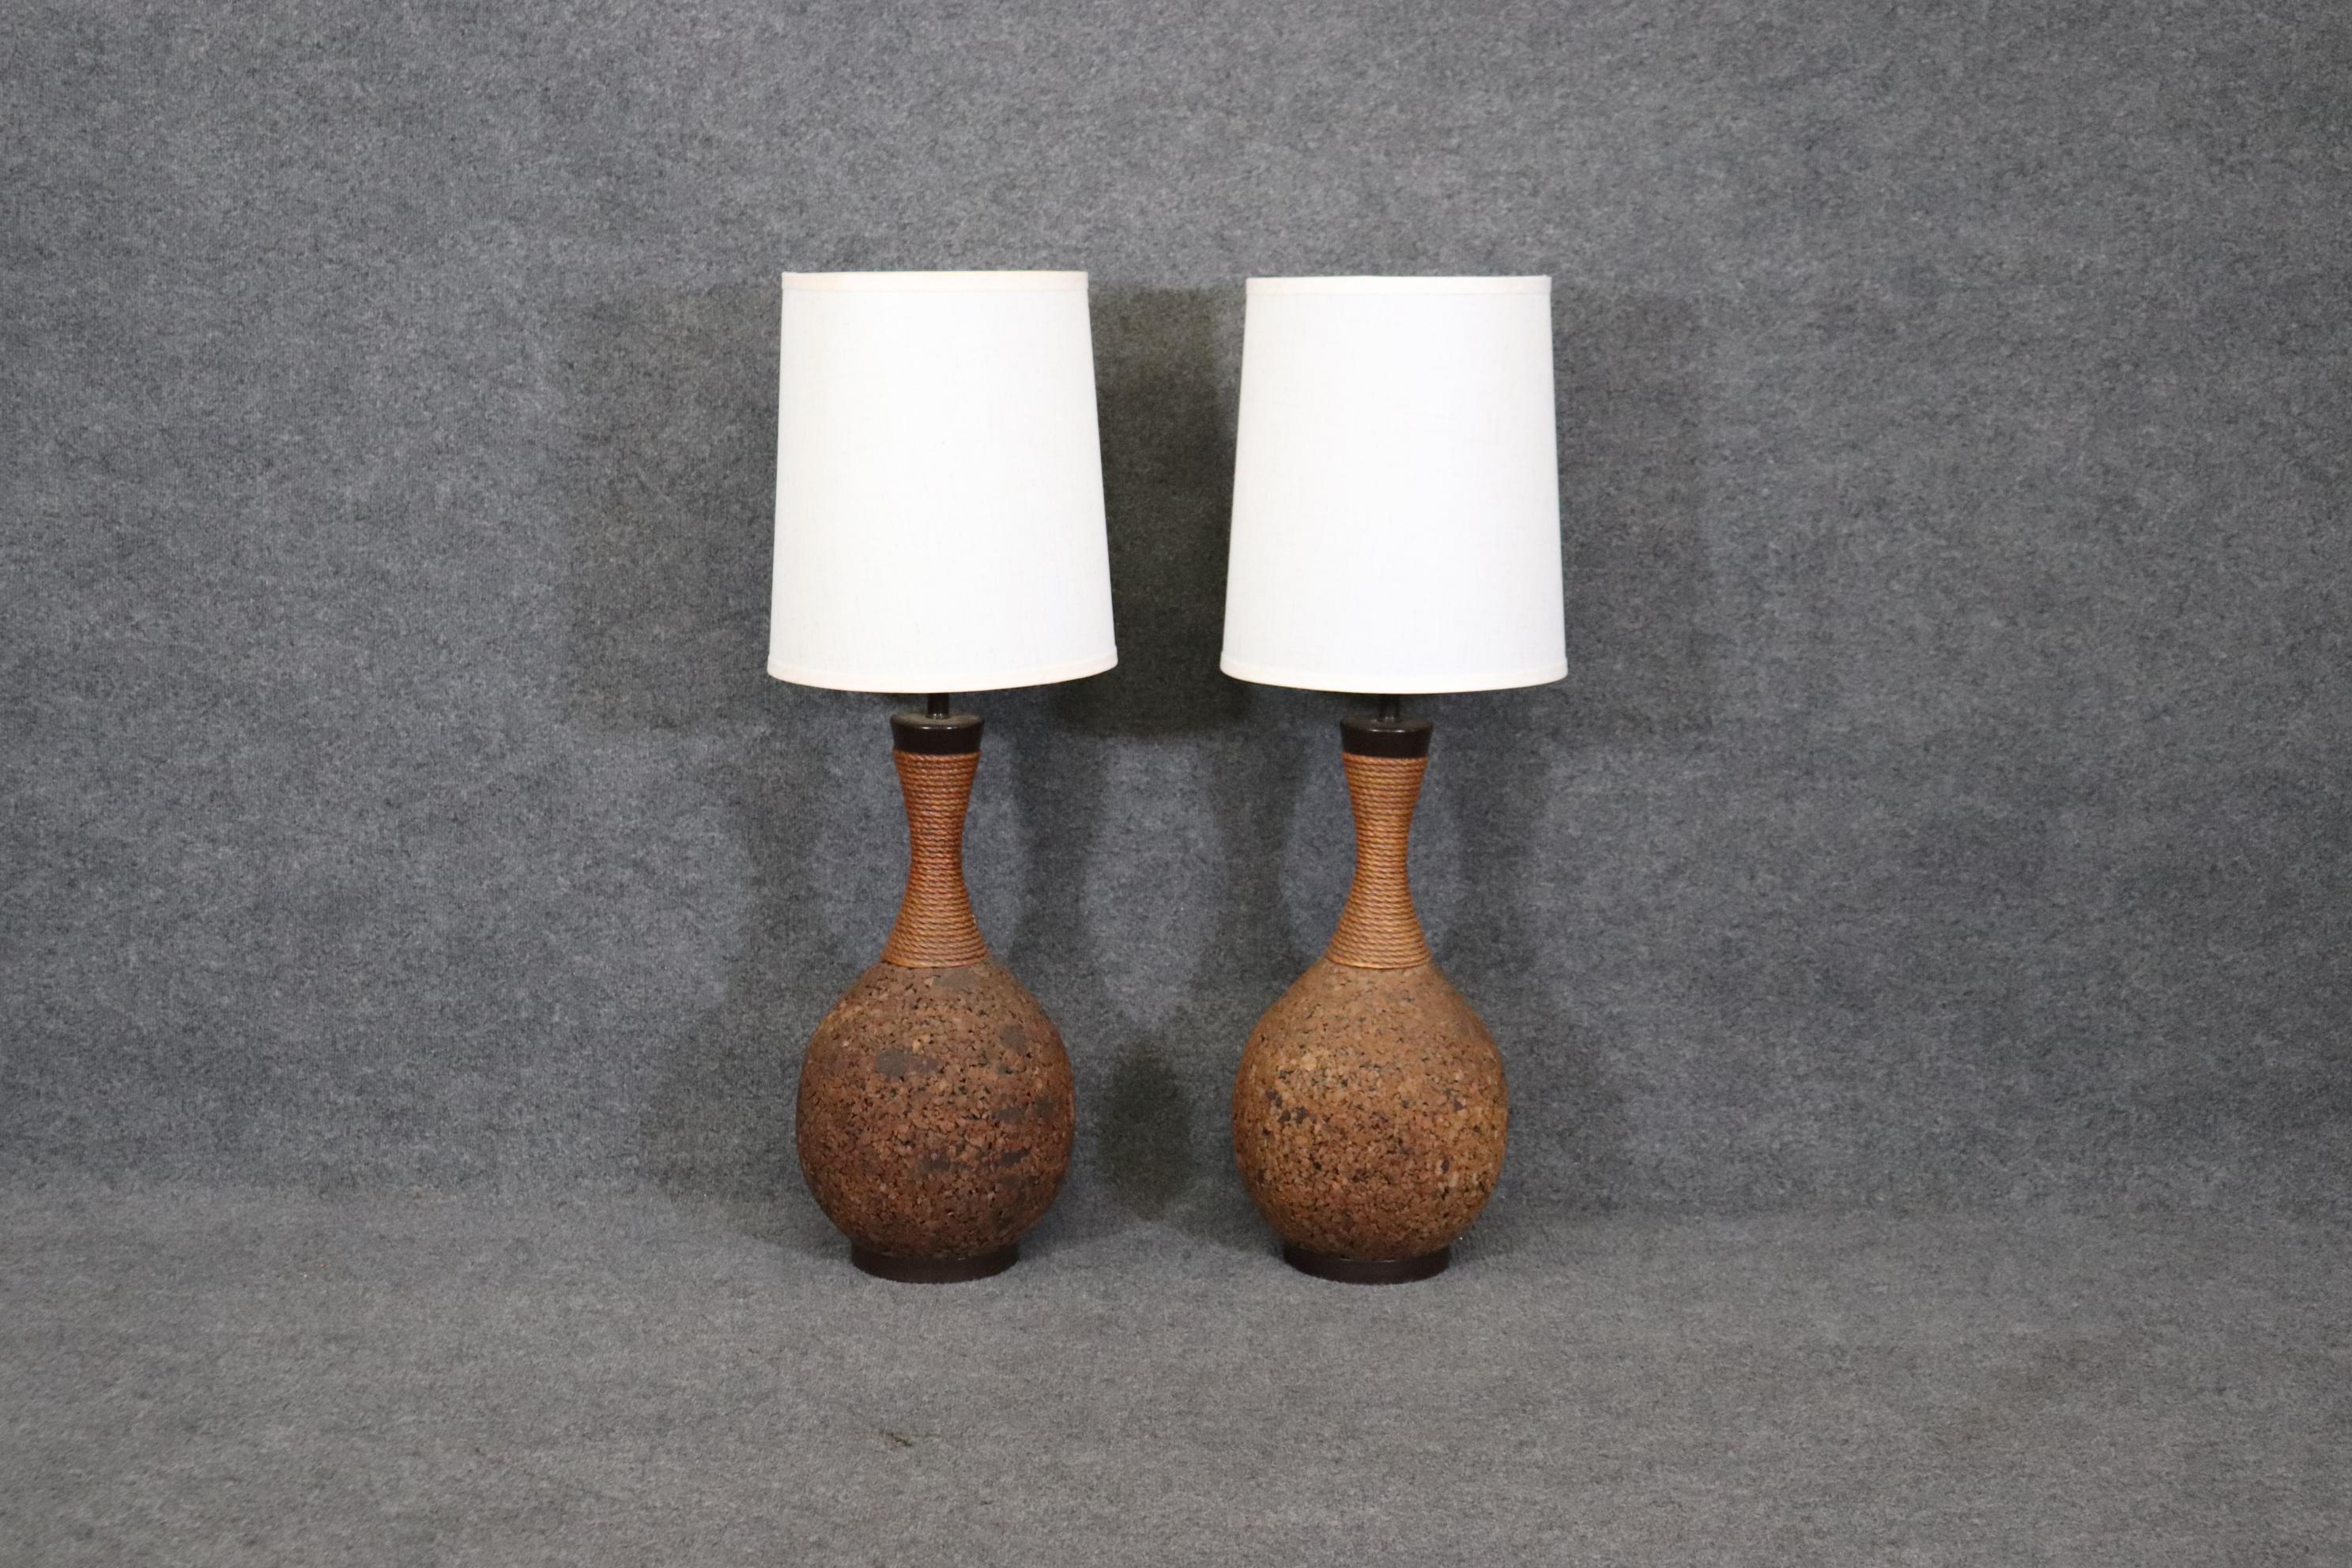 Dimensions- H: 41 1/4in W: 14 1/4in D: 14 1/4in (measurements with shades on) 
                       H: 37 3/4in W: 11 1/2in D: 11 1/2in (measurements without shades)

This pair of Mid Century Modern cork table lamps is truly an example of